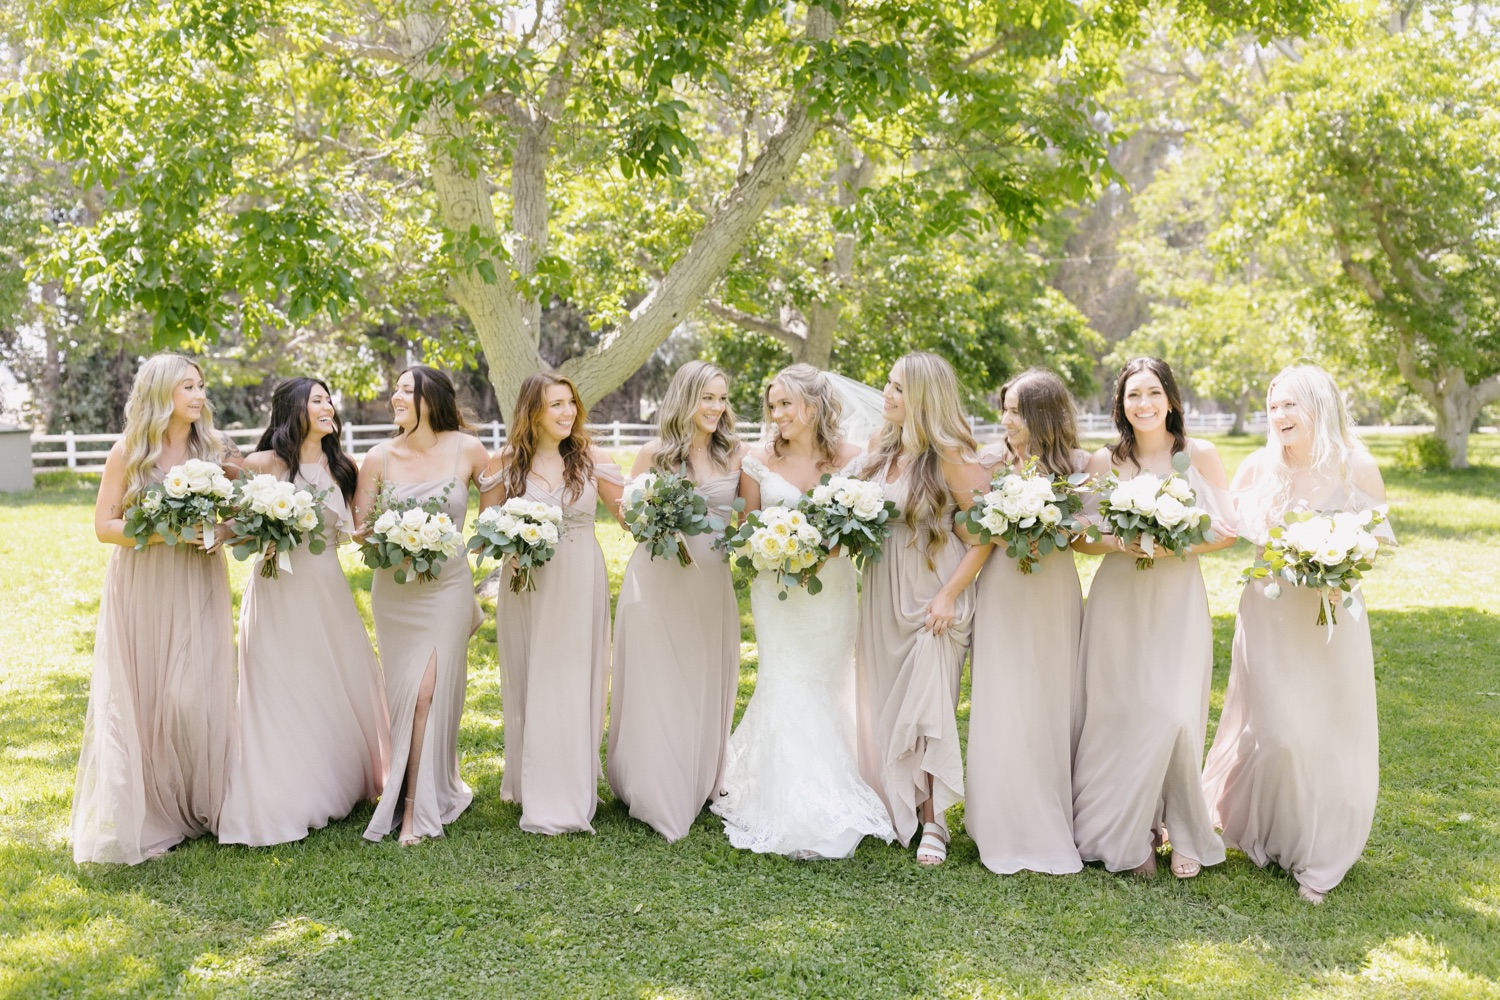 Bridesmaids walking and laughing together at walnut grove wedding by tayler enerle